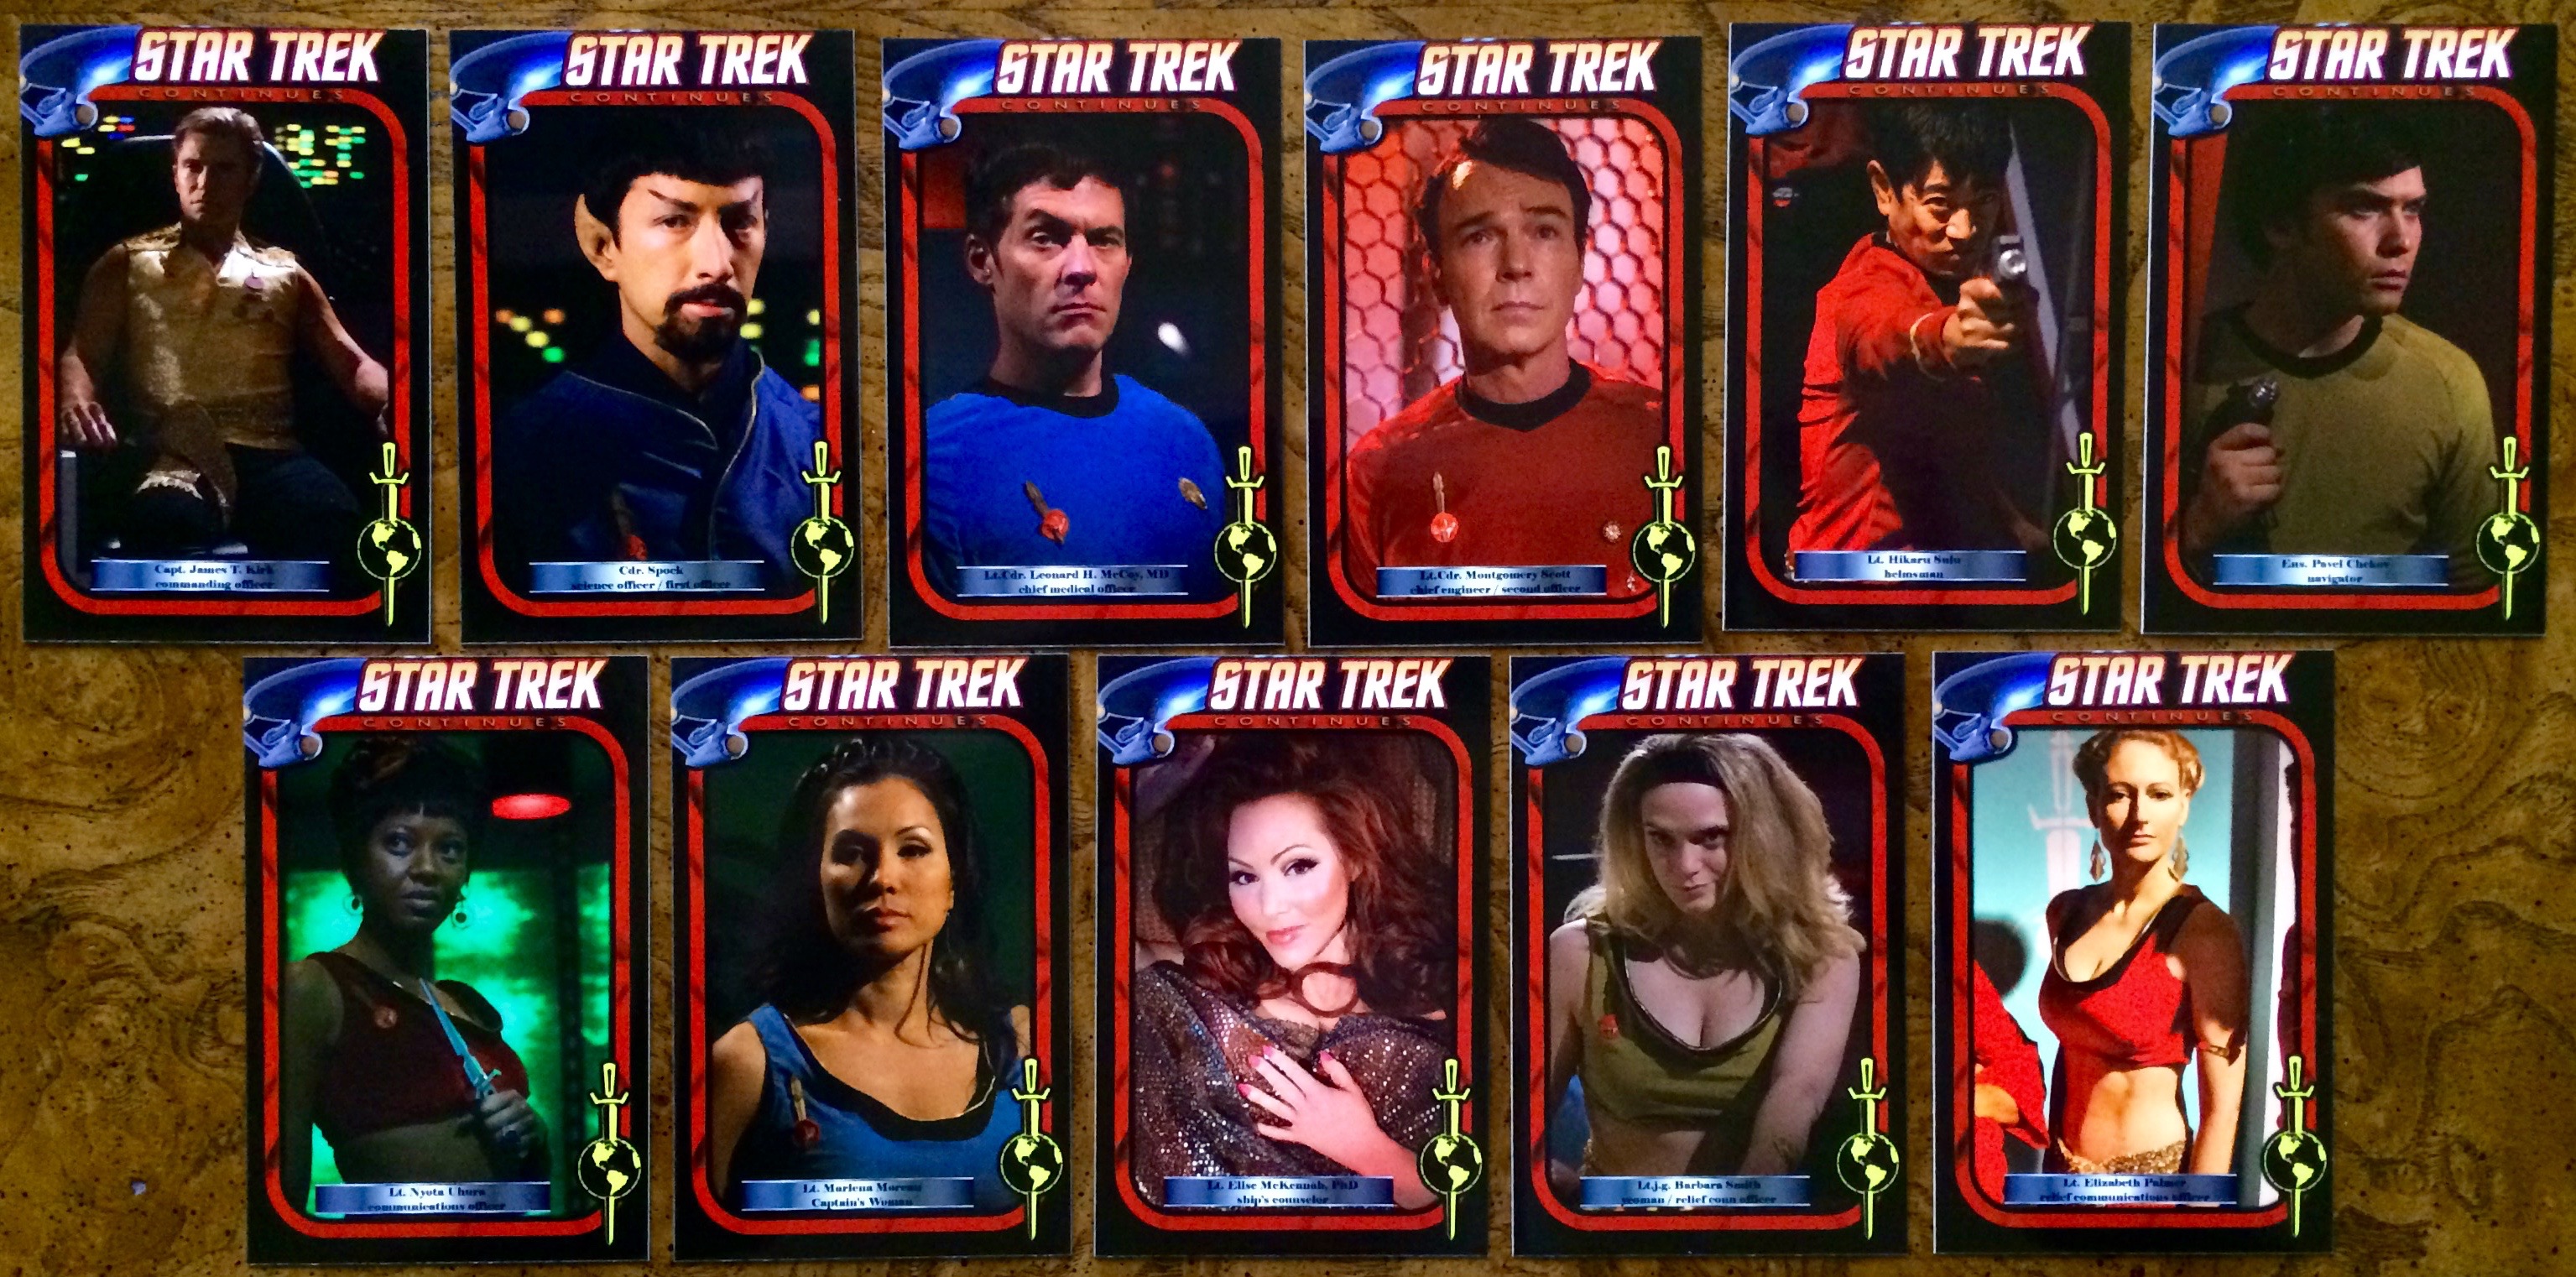 Star Trek Continues trading cards, mirror universe